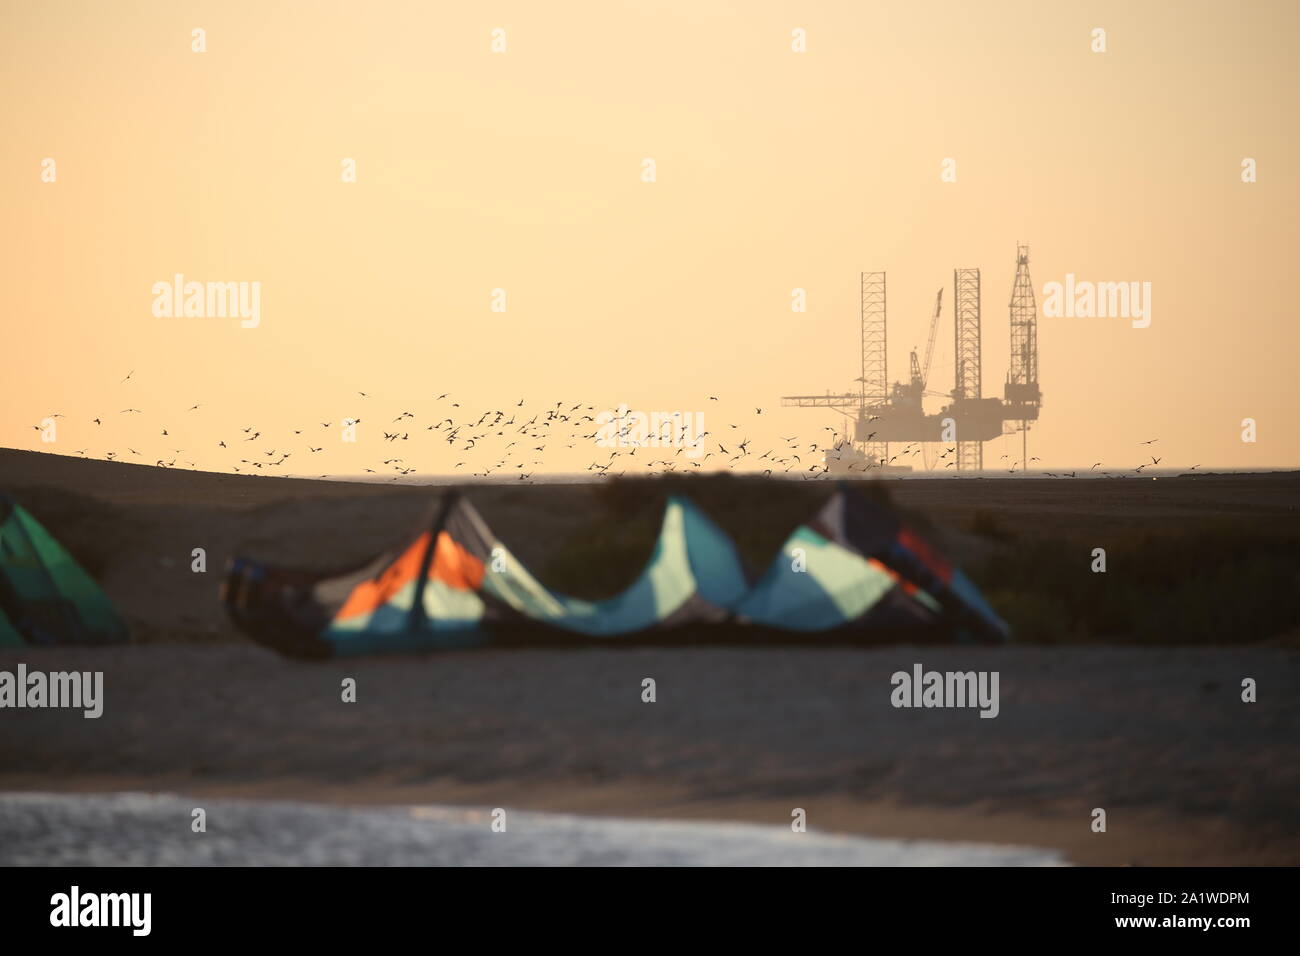 Strange juxtaposition between kitesurfing equipment, a flock of birds and an oil rig during sunset in Egypt Stock Photo